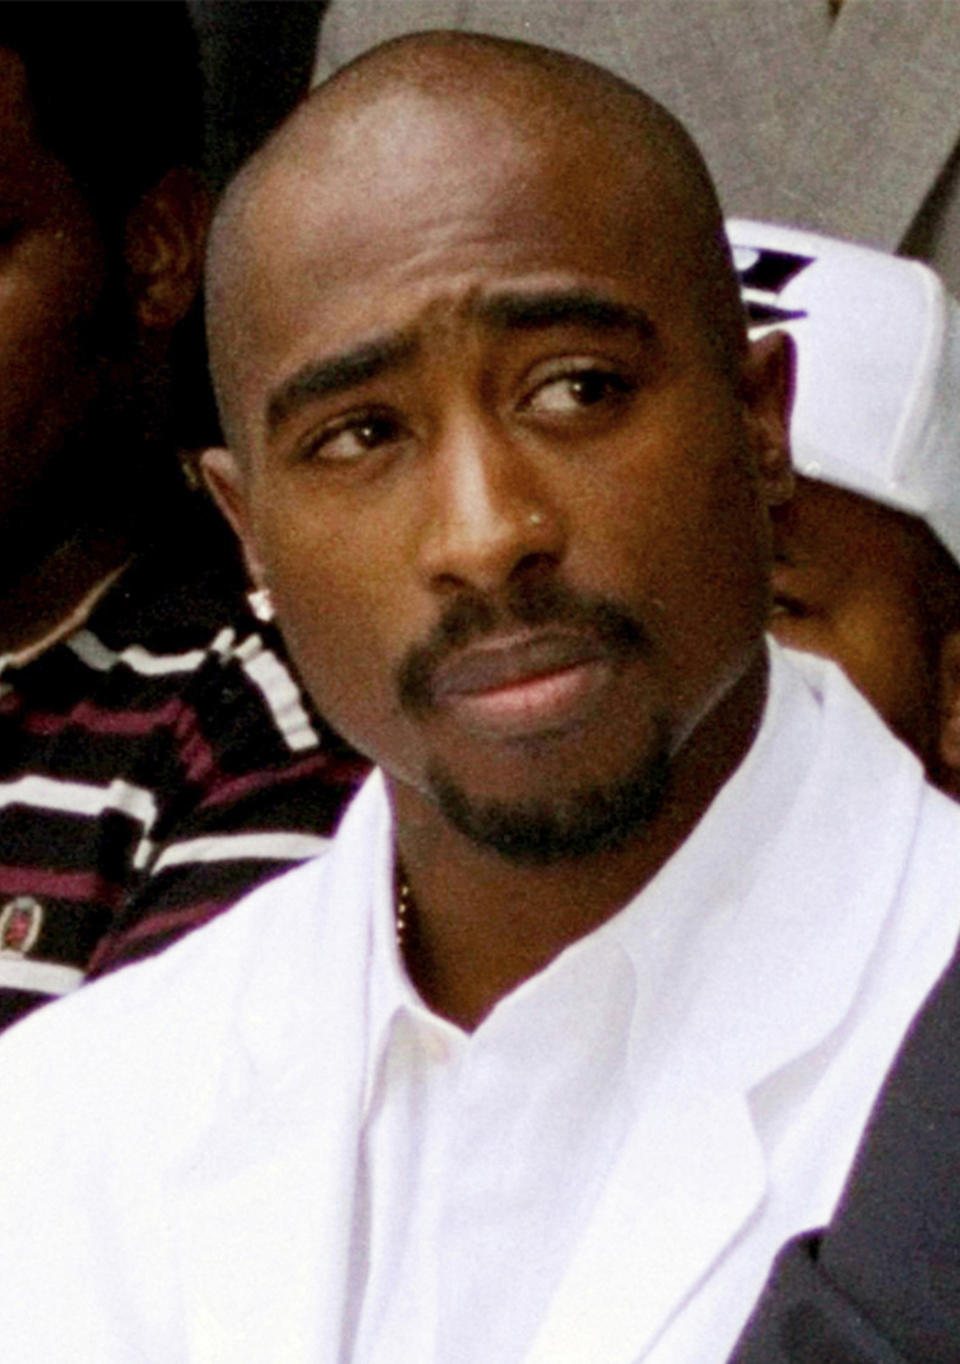 FILE - Rapper Tupac Shakur attends a voter registration event in South Central Los Angeles, Aug. 15, 1996. Duane "Keffe D" Davis, the former Los Angeles-area gang leader accused of murder in the killing of Shakur in 1996 in Las Vegas, is seeking to be released to house arrest ahead of his murder trial in June 2024. A Nevada judge on Tuesday, Dec. 19, 2023, set a Tuesday, Jan. 2, 2024, hearing on the request by Duane "Keffe D" Davis. (AP Photo/Frank Wiese, File)